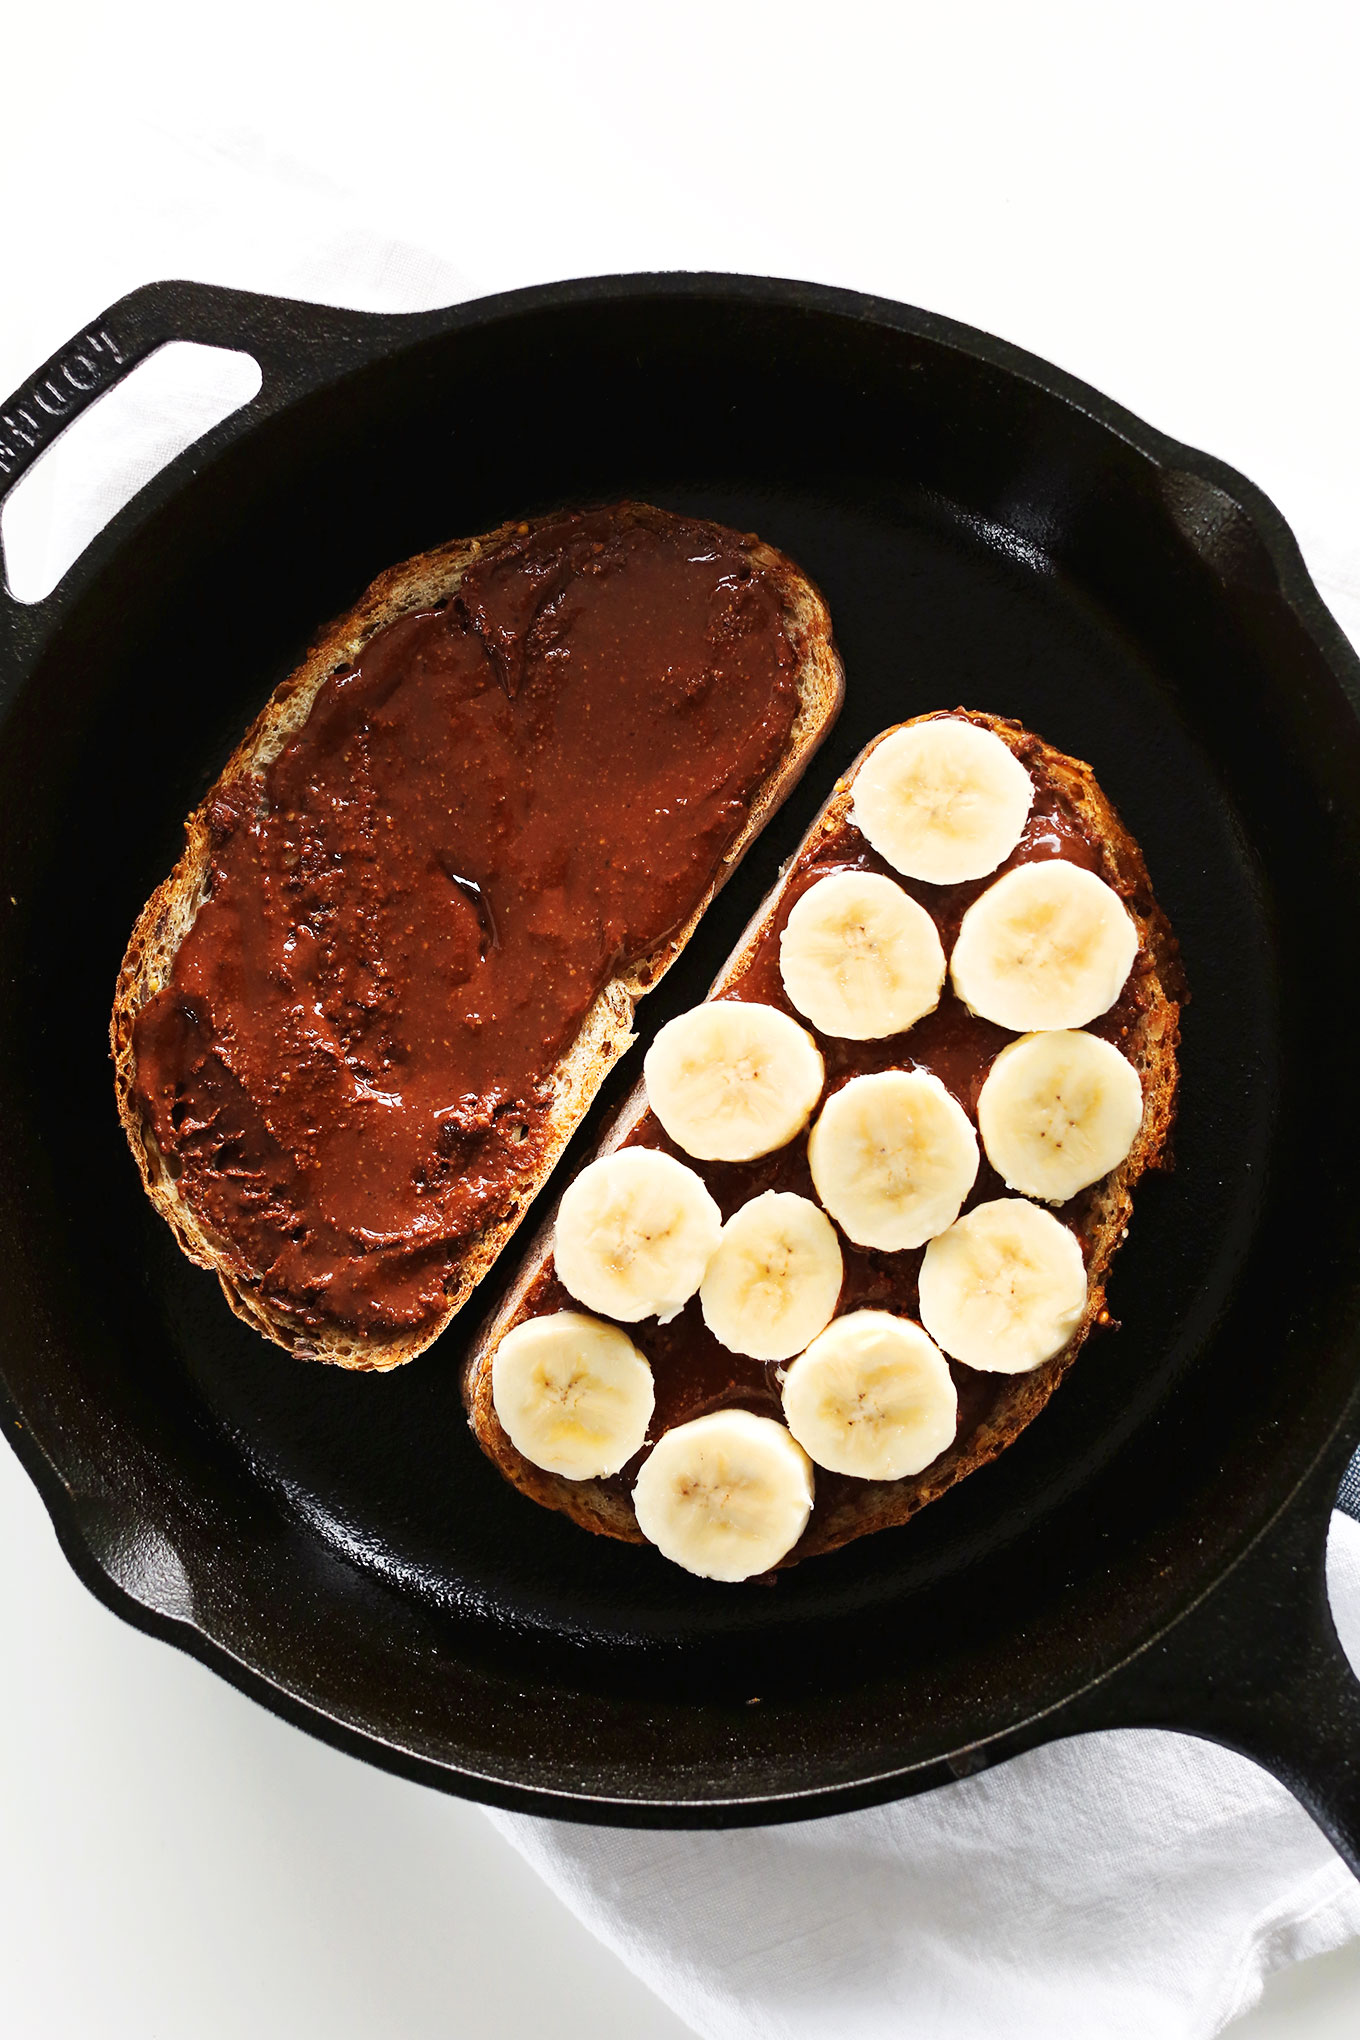 Grilling a Banana Nutella Sandwich in a cast-iron skillet